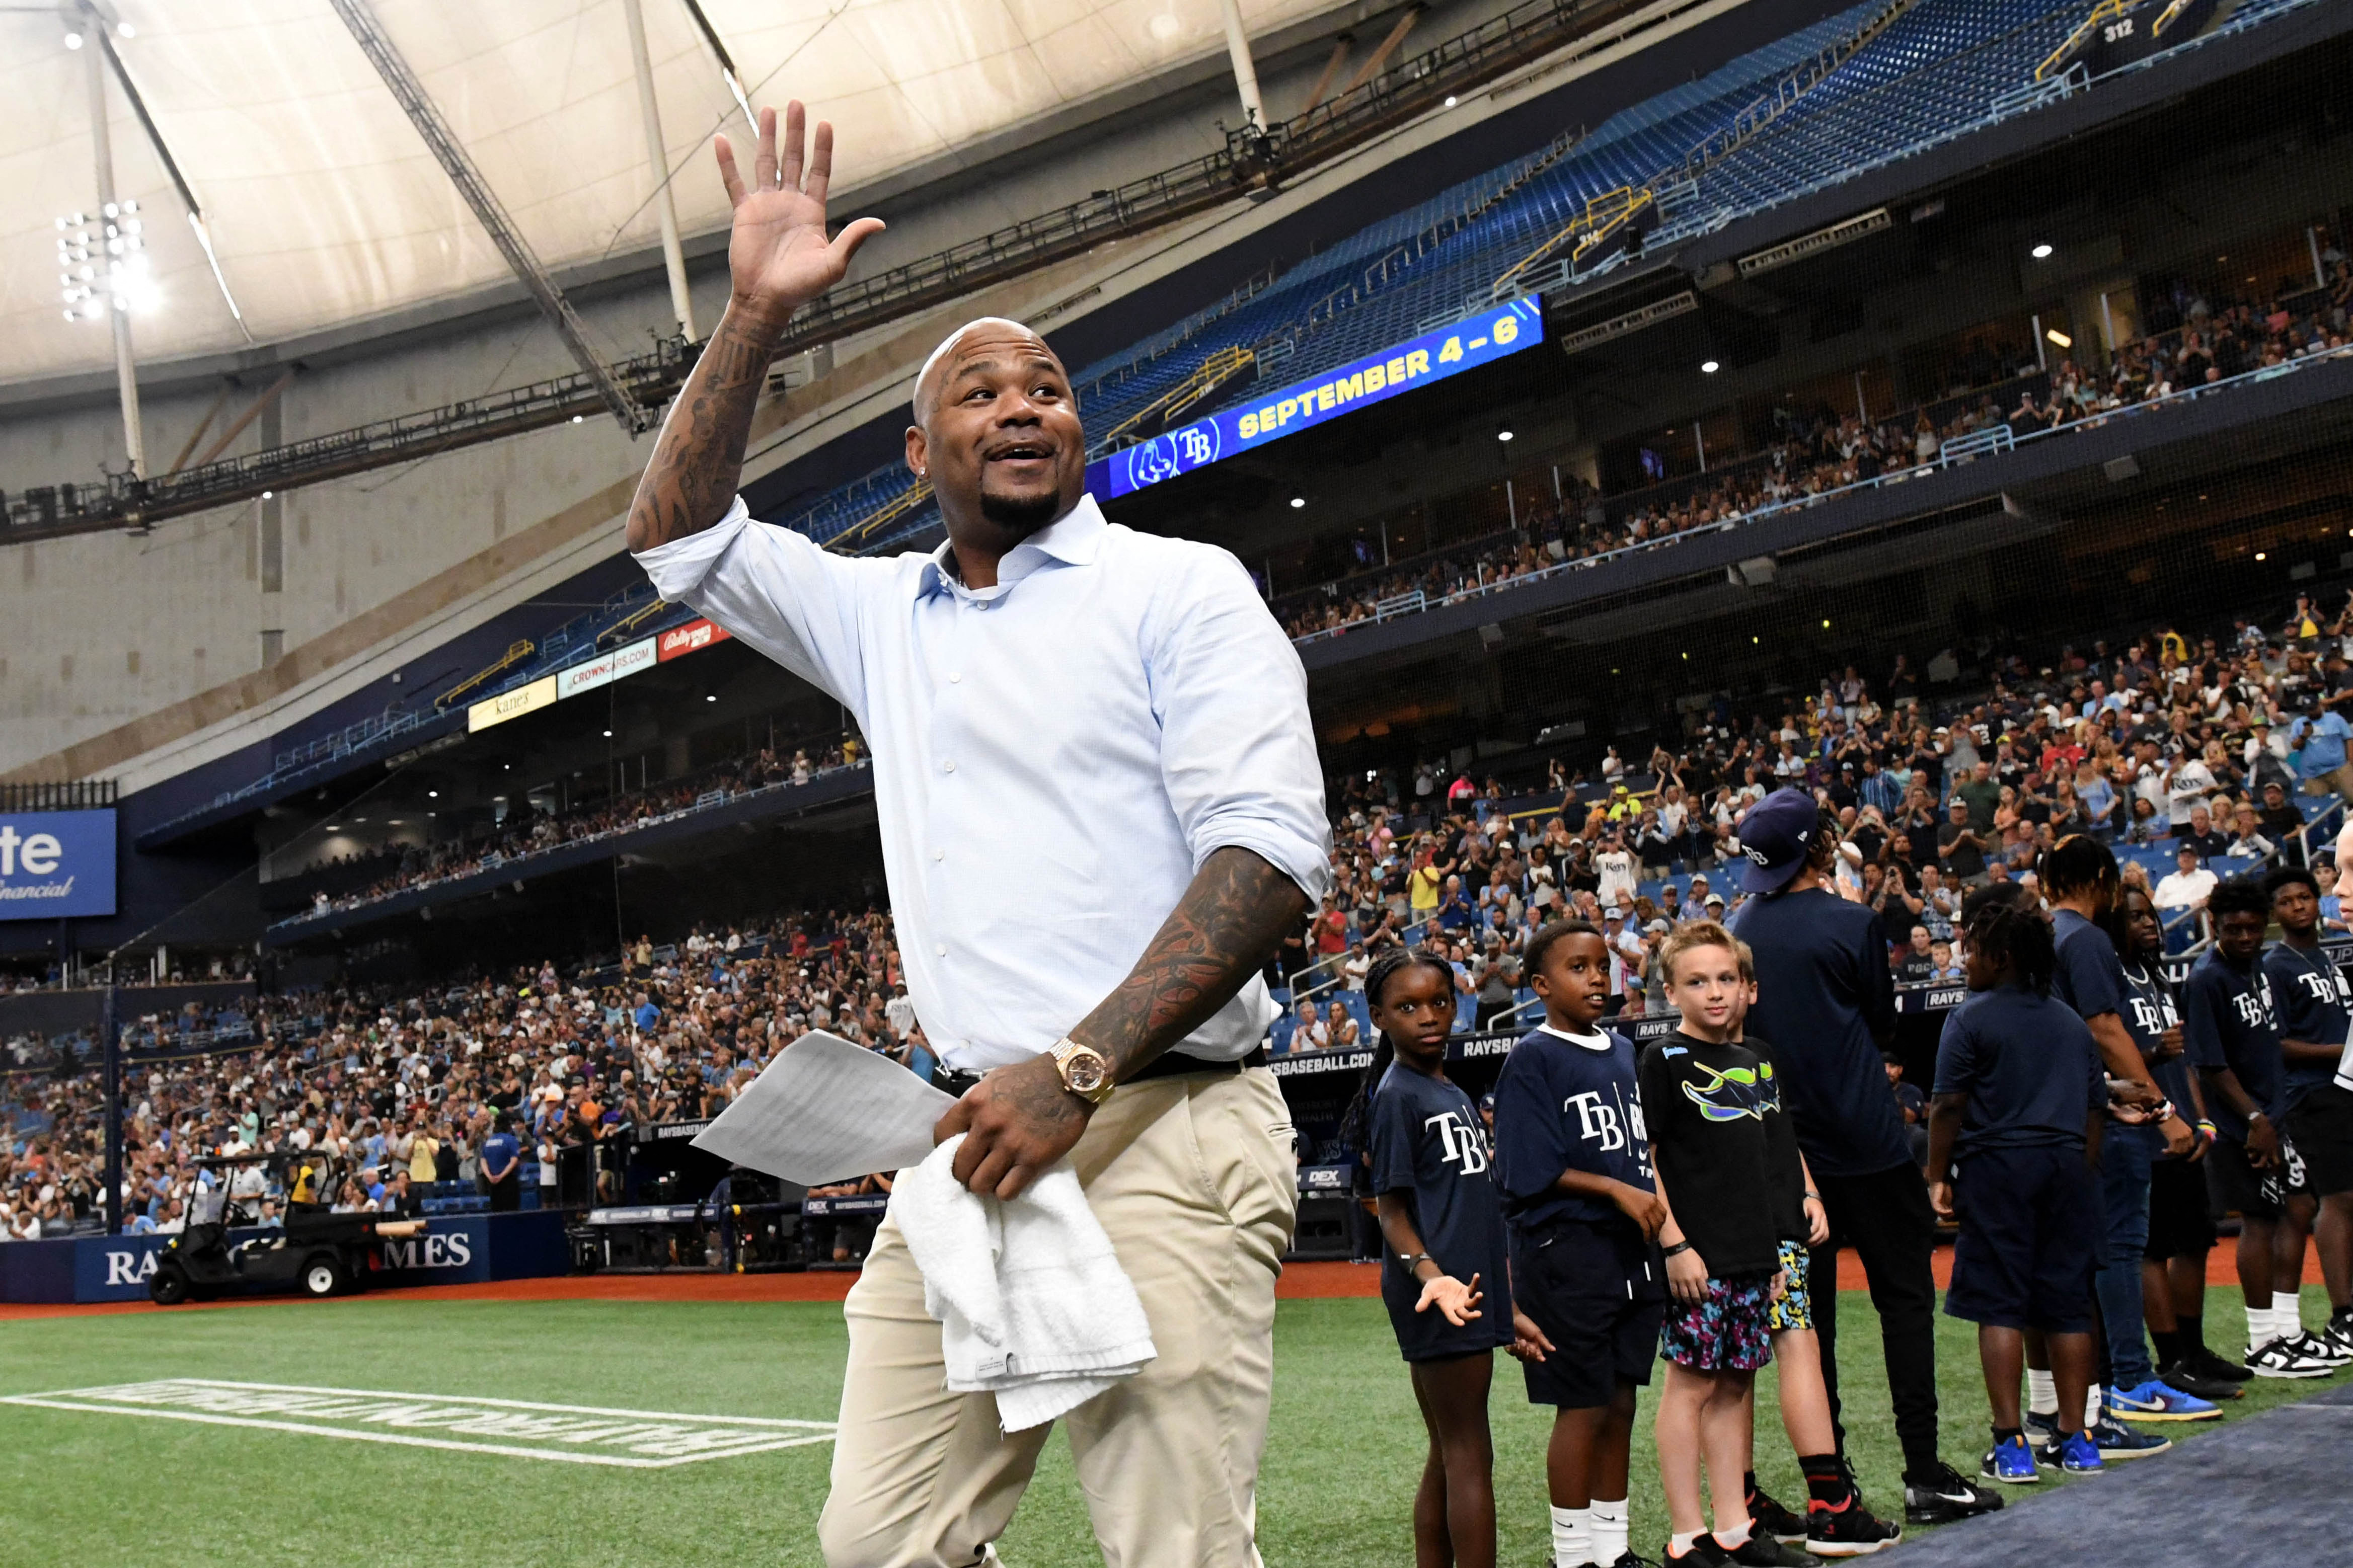 Carl Crawford inducted into Rays Hall of Fame